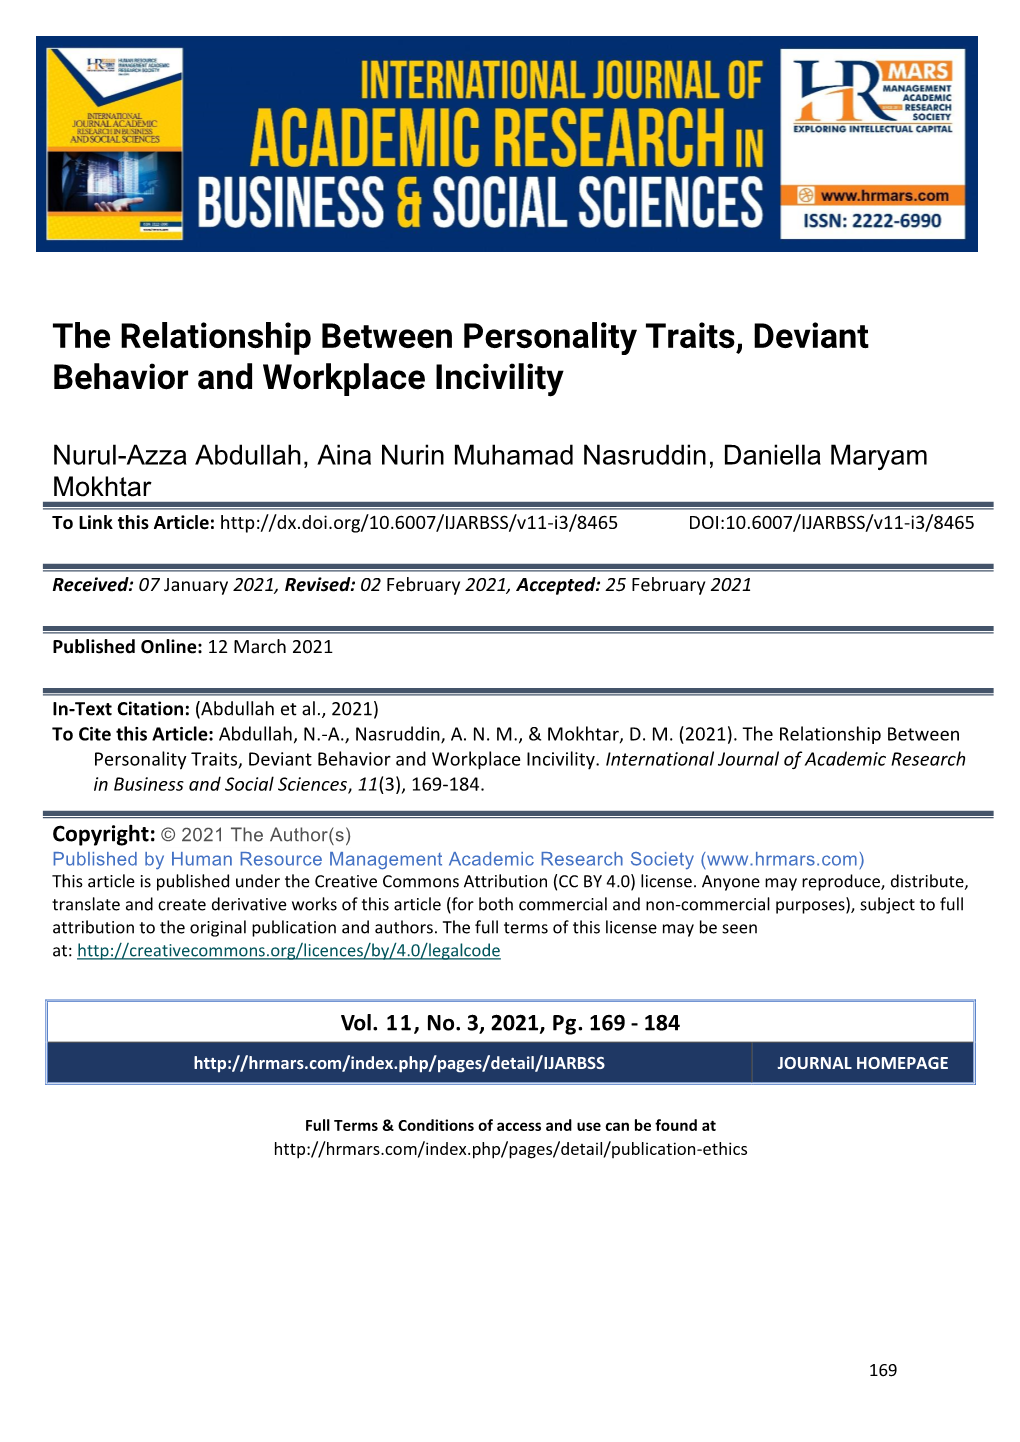 The Relationship Between Personality Traits, Deviant Behavior and Workplace Incivility